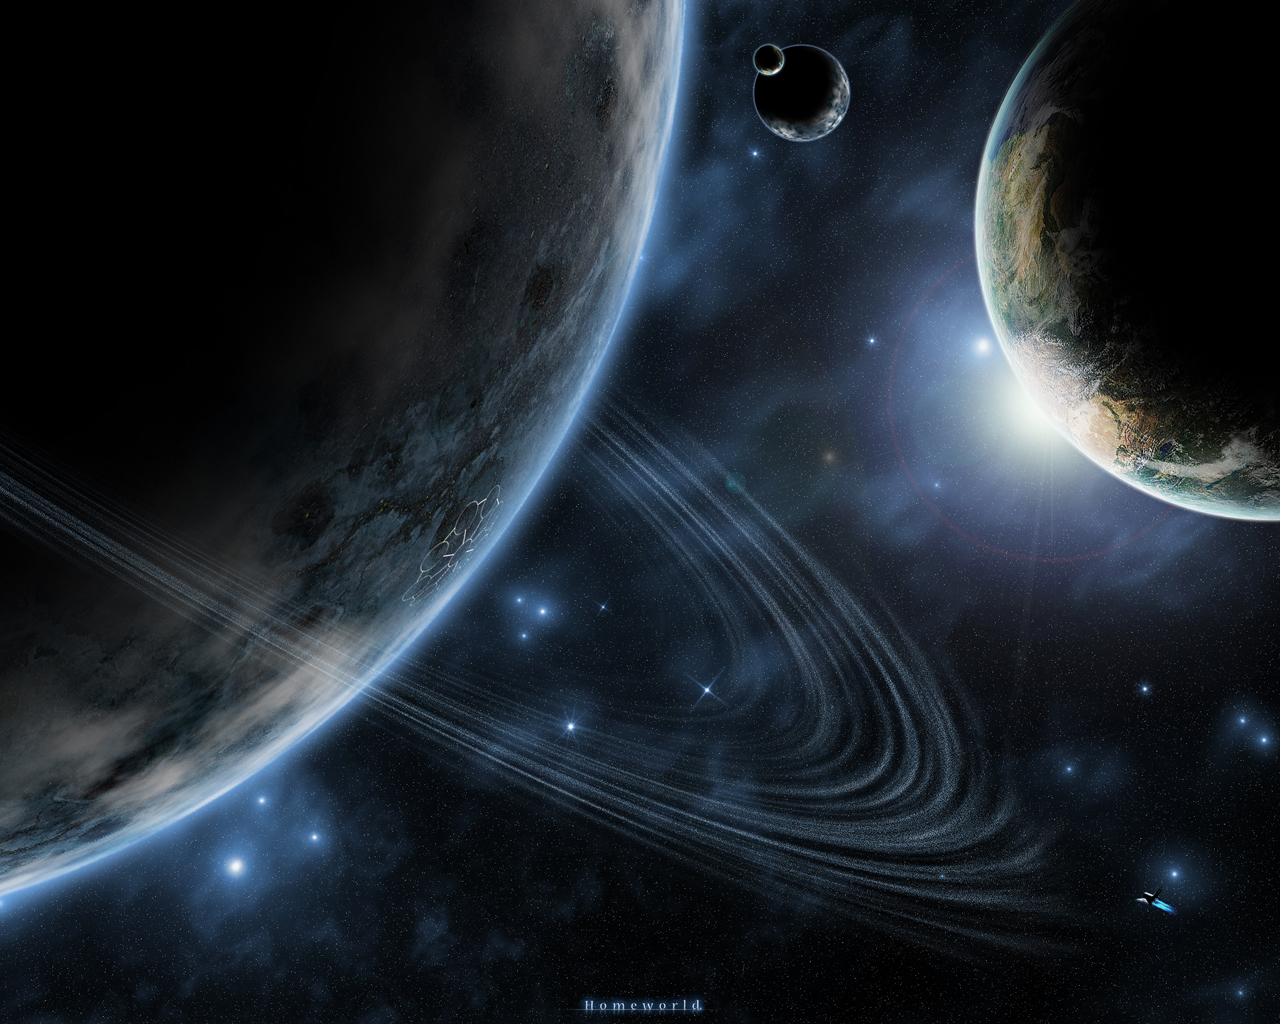 Previous, Space - Manned planet wallpaper